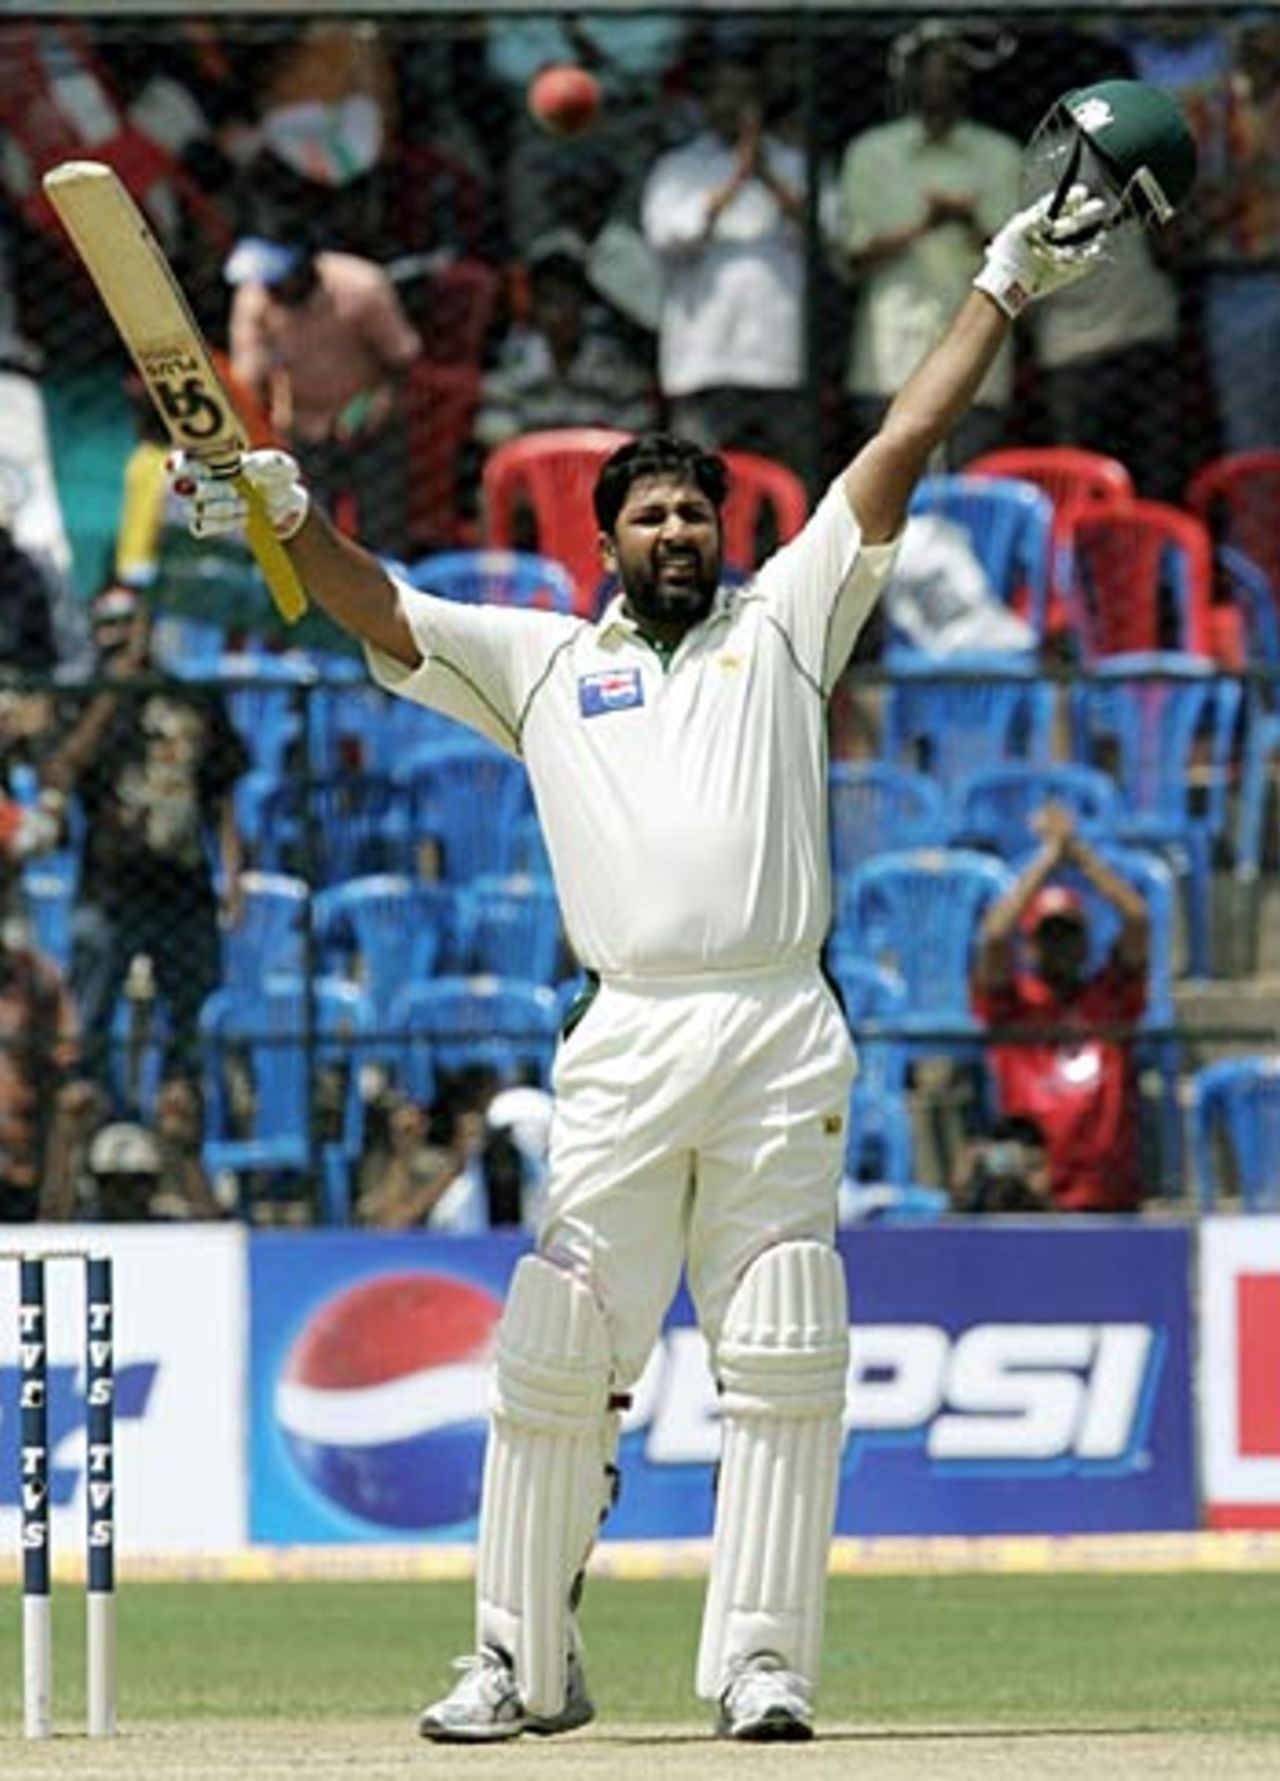 Inzamam-ul-Haq reaches his hundred in his 100th Test, India v Pakistan, 3rd Test, Bangalore, March 24, 2005